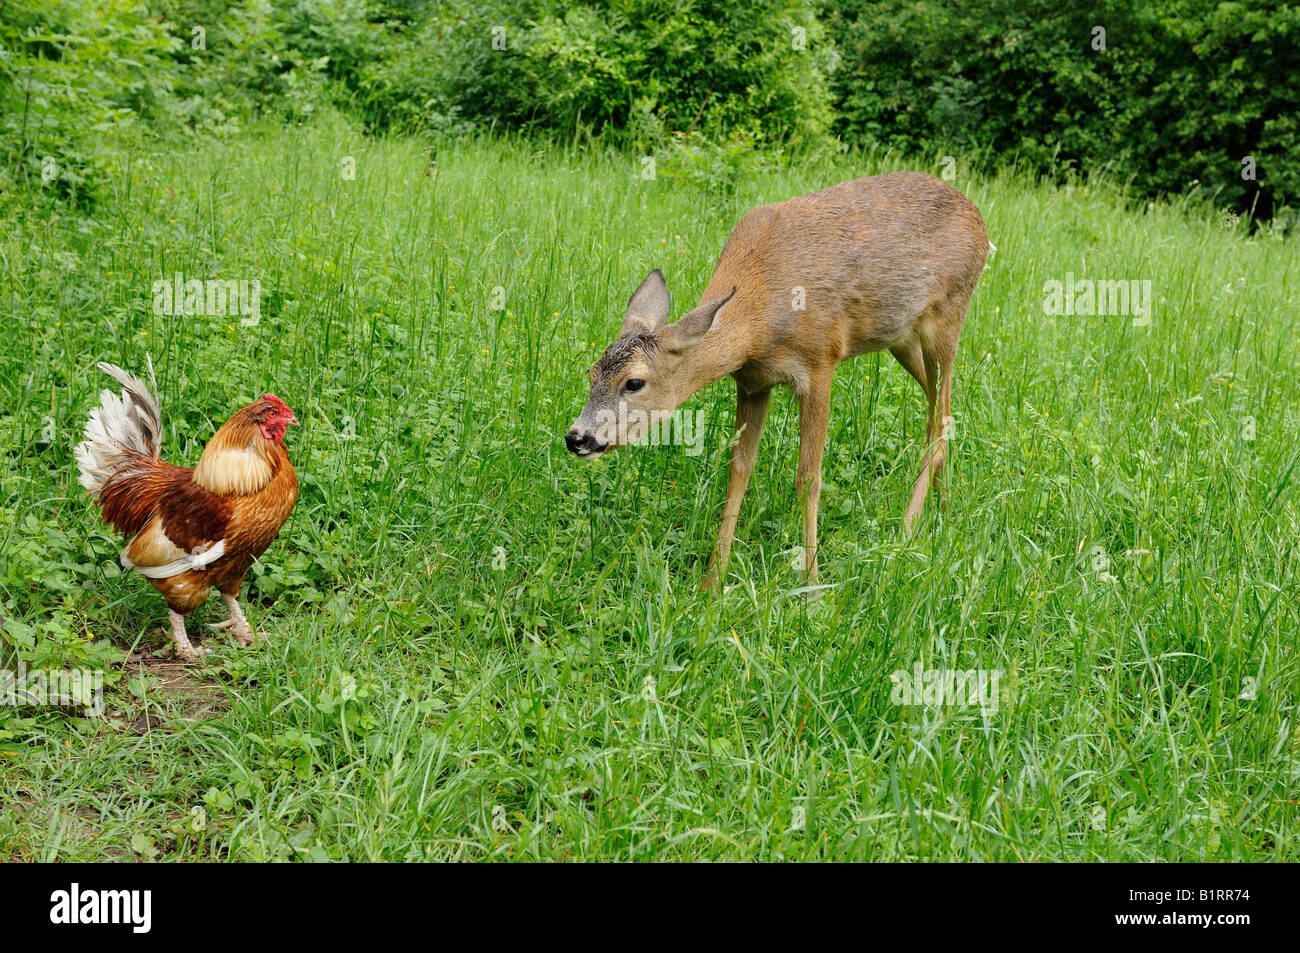 Roe Deer (Capreolus capreolus) inquisitively sniffing a chicken Stock Photo